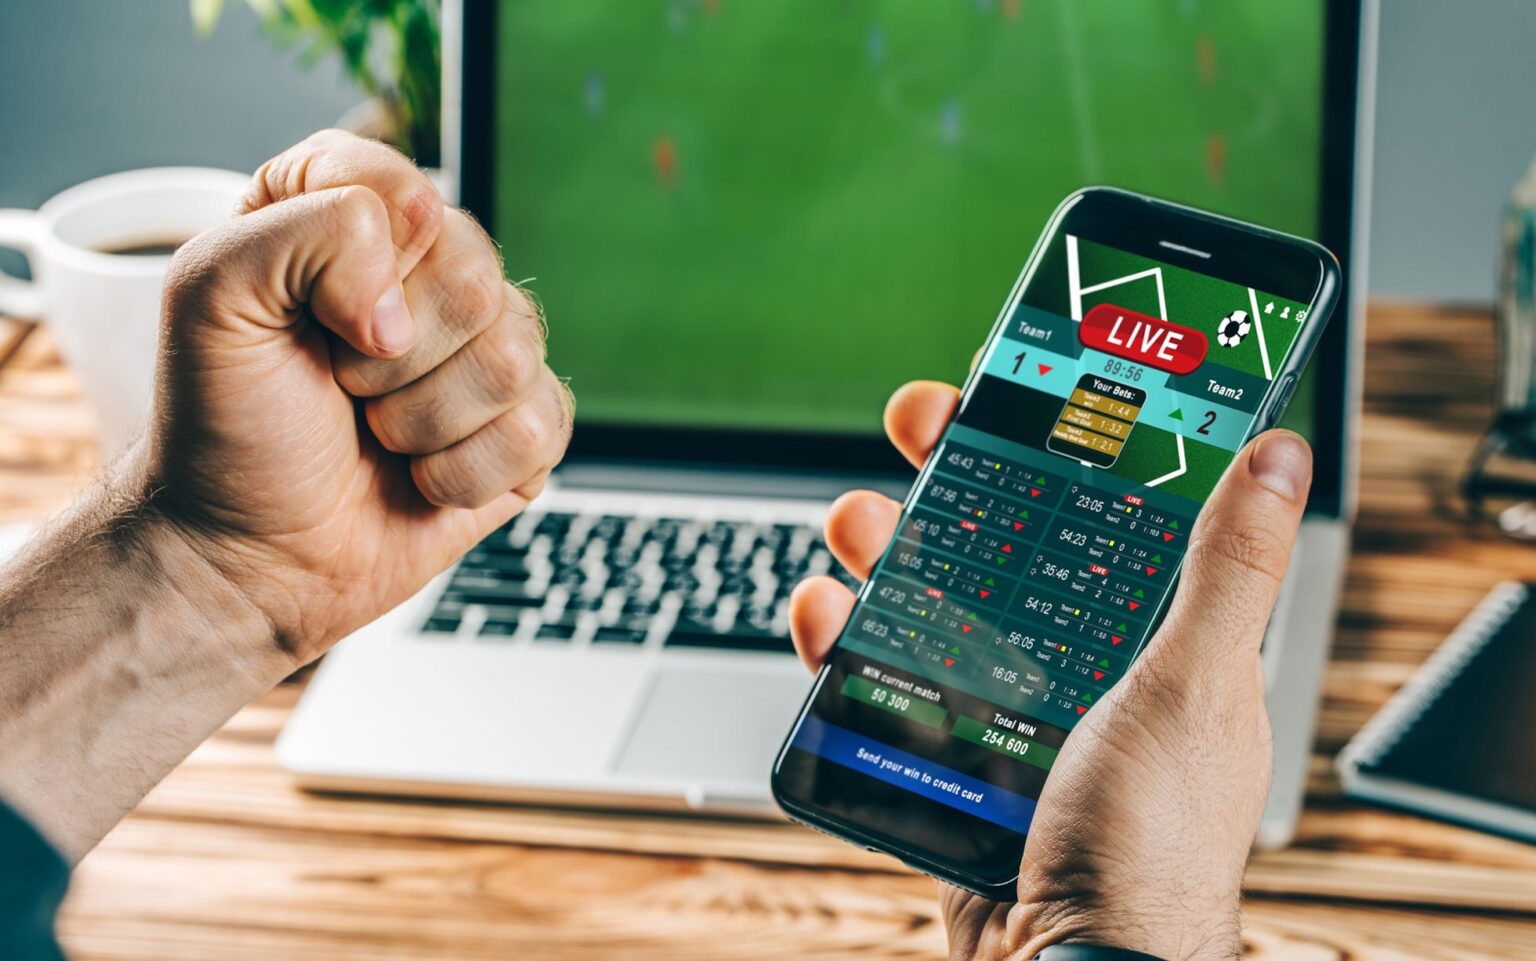 According to experts, playing without a certain strategy is dooming you to lose money. Here's how you can win money betting on football.